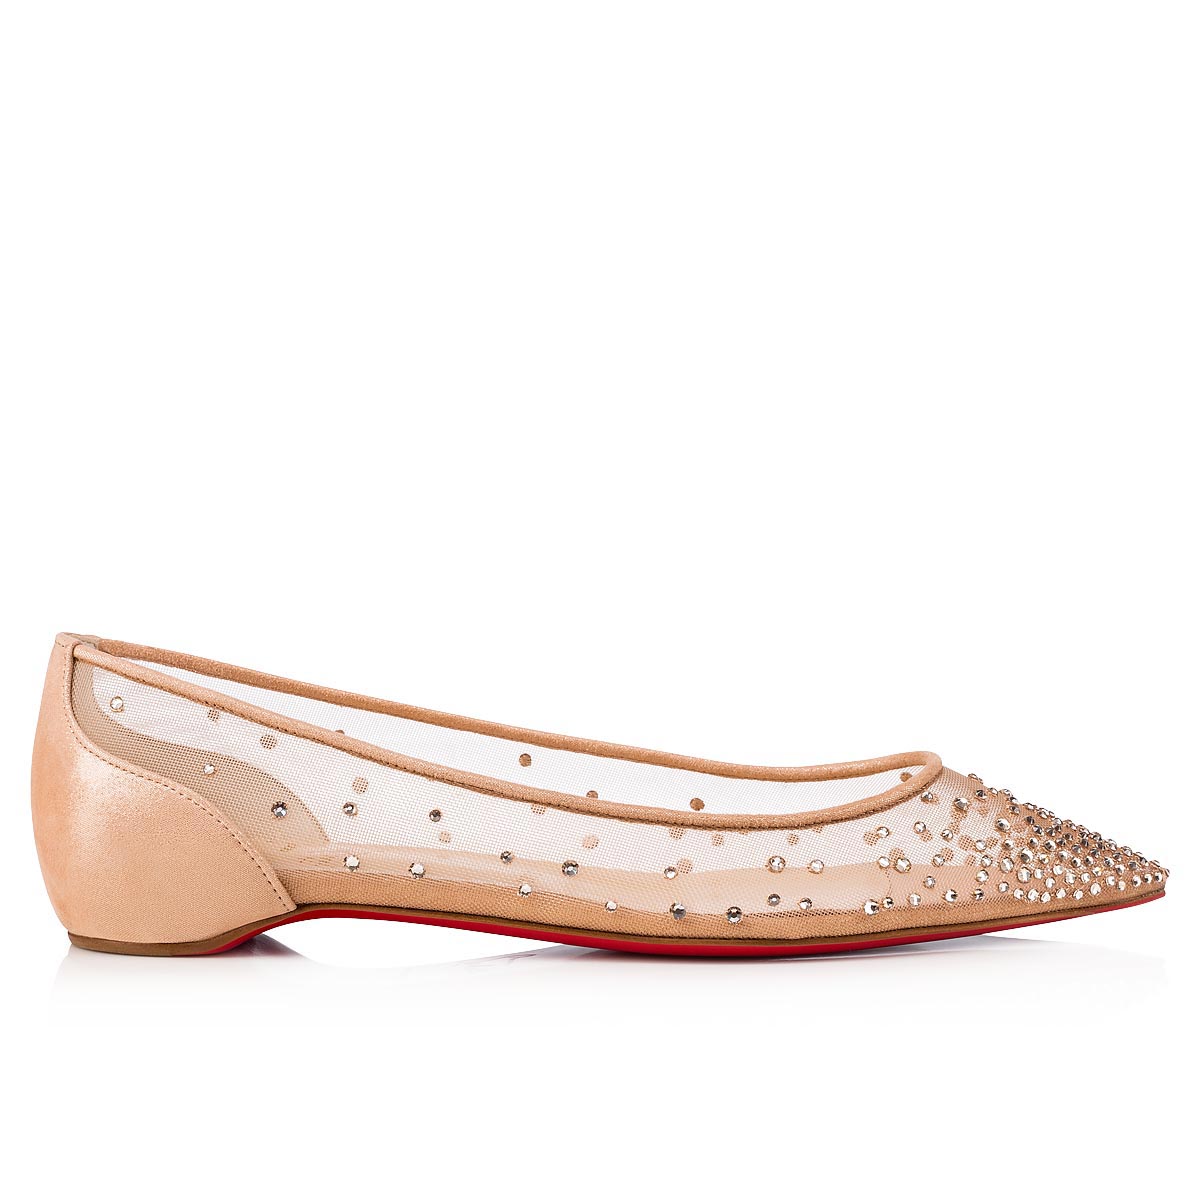 Red bottom Follies Strass strass wedding shoes by Christian Louboutin